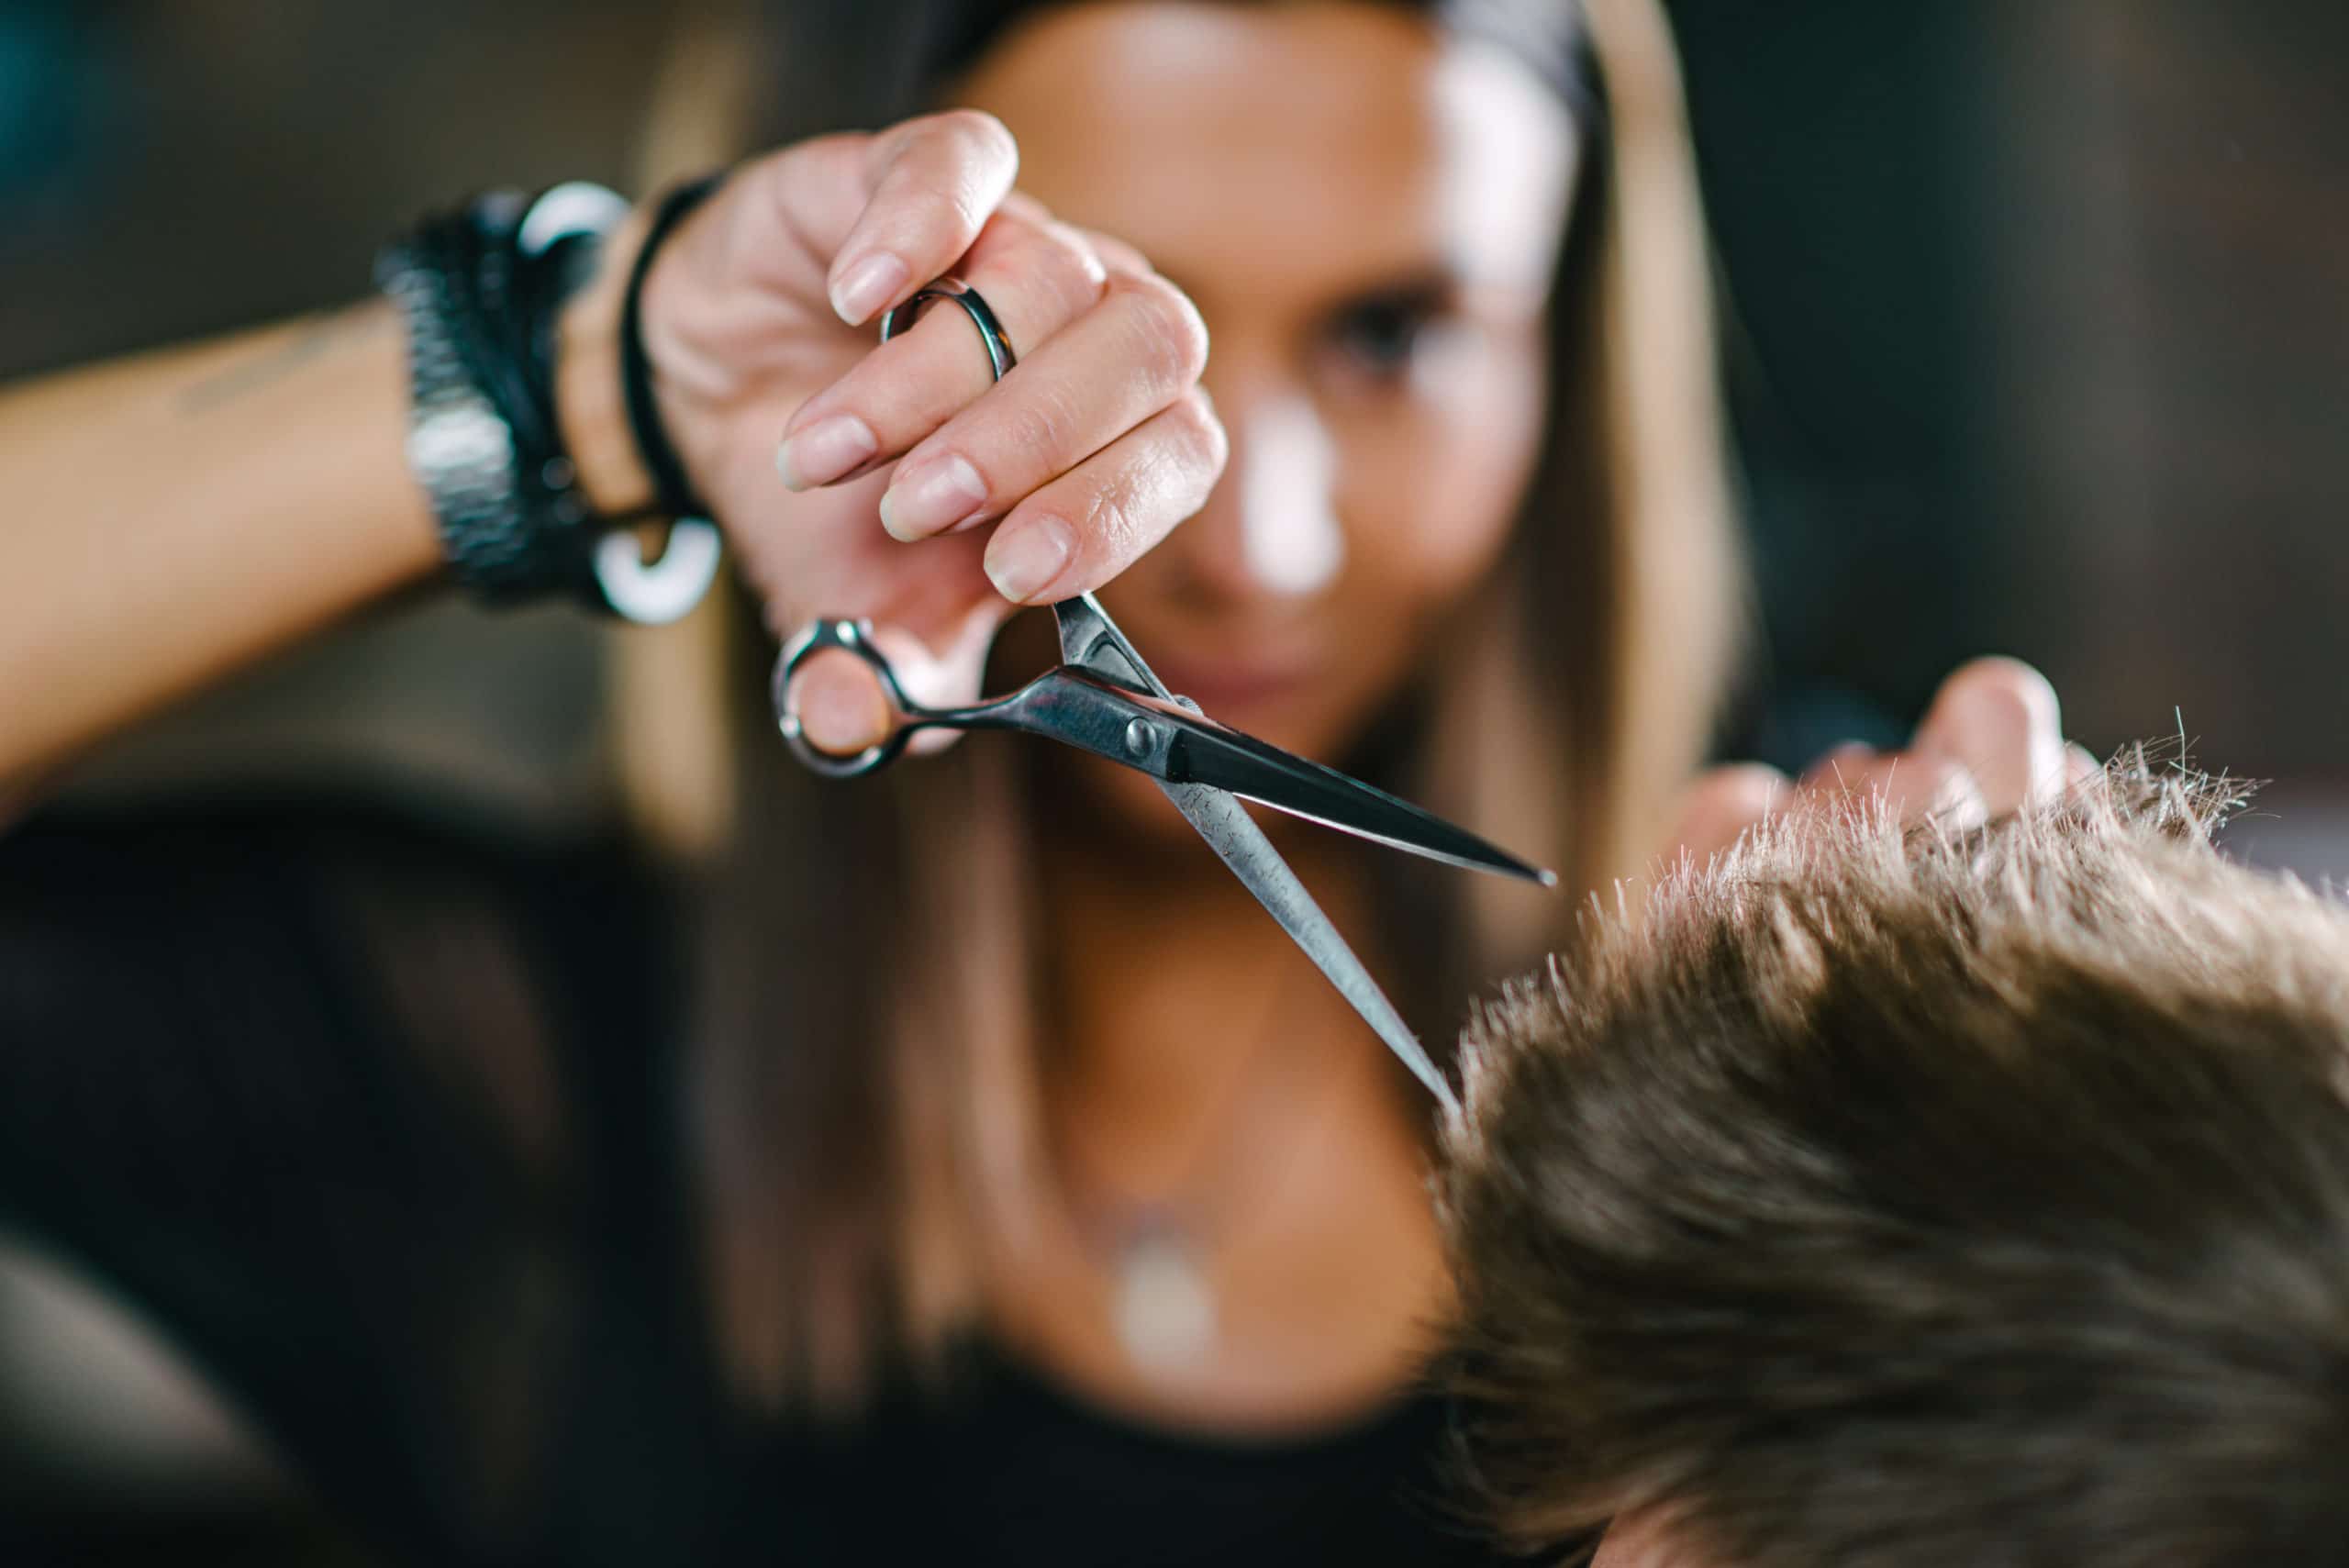 How Do You Remove Hairspray From A Salon Chair or Barber Chair?